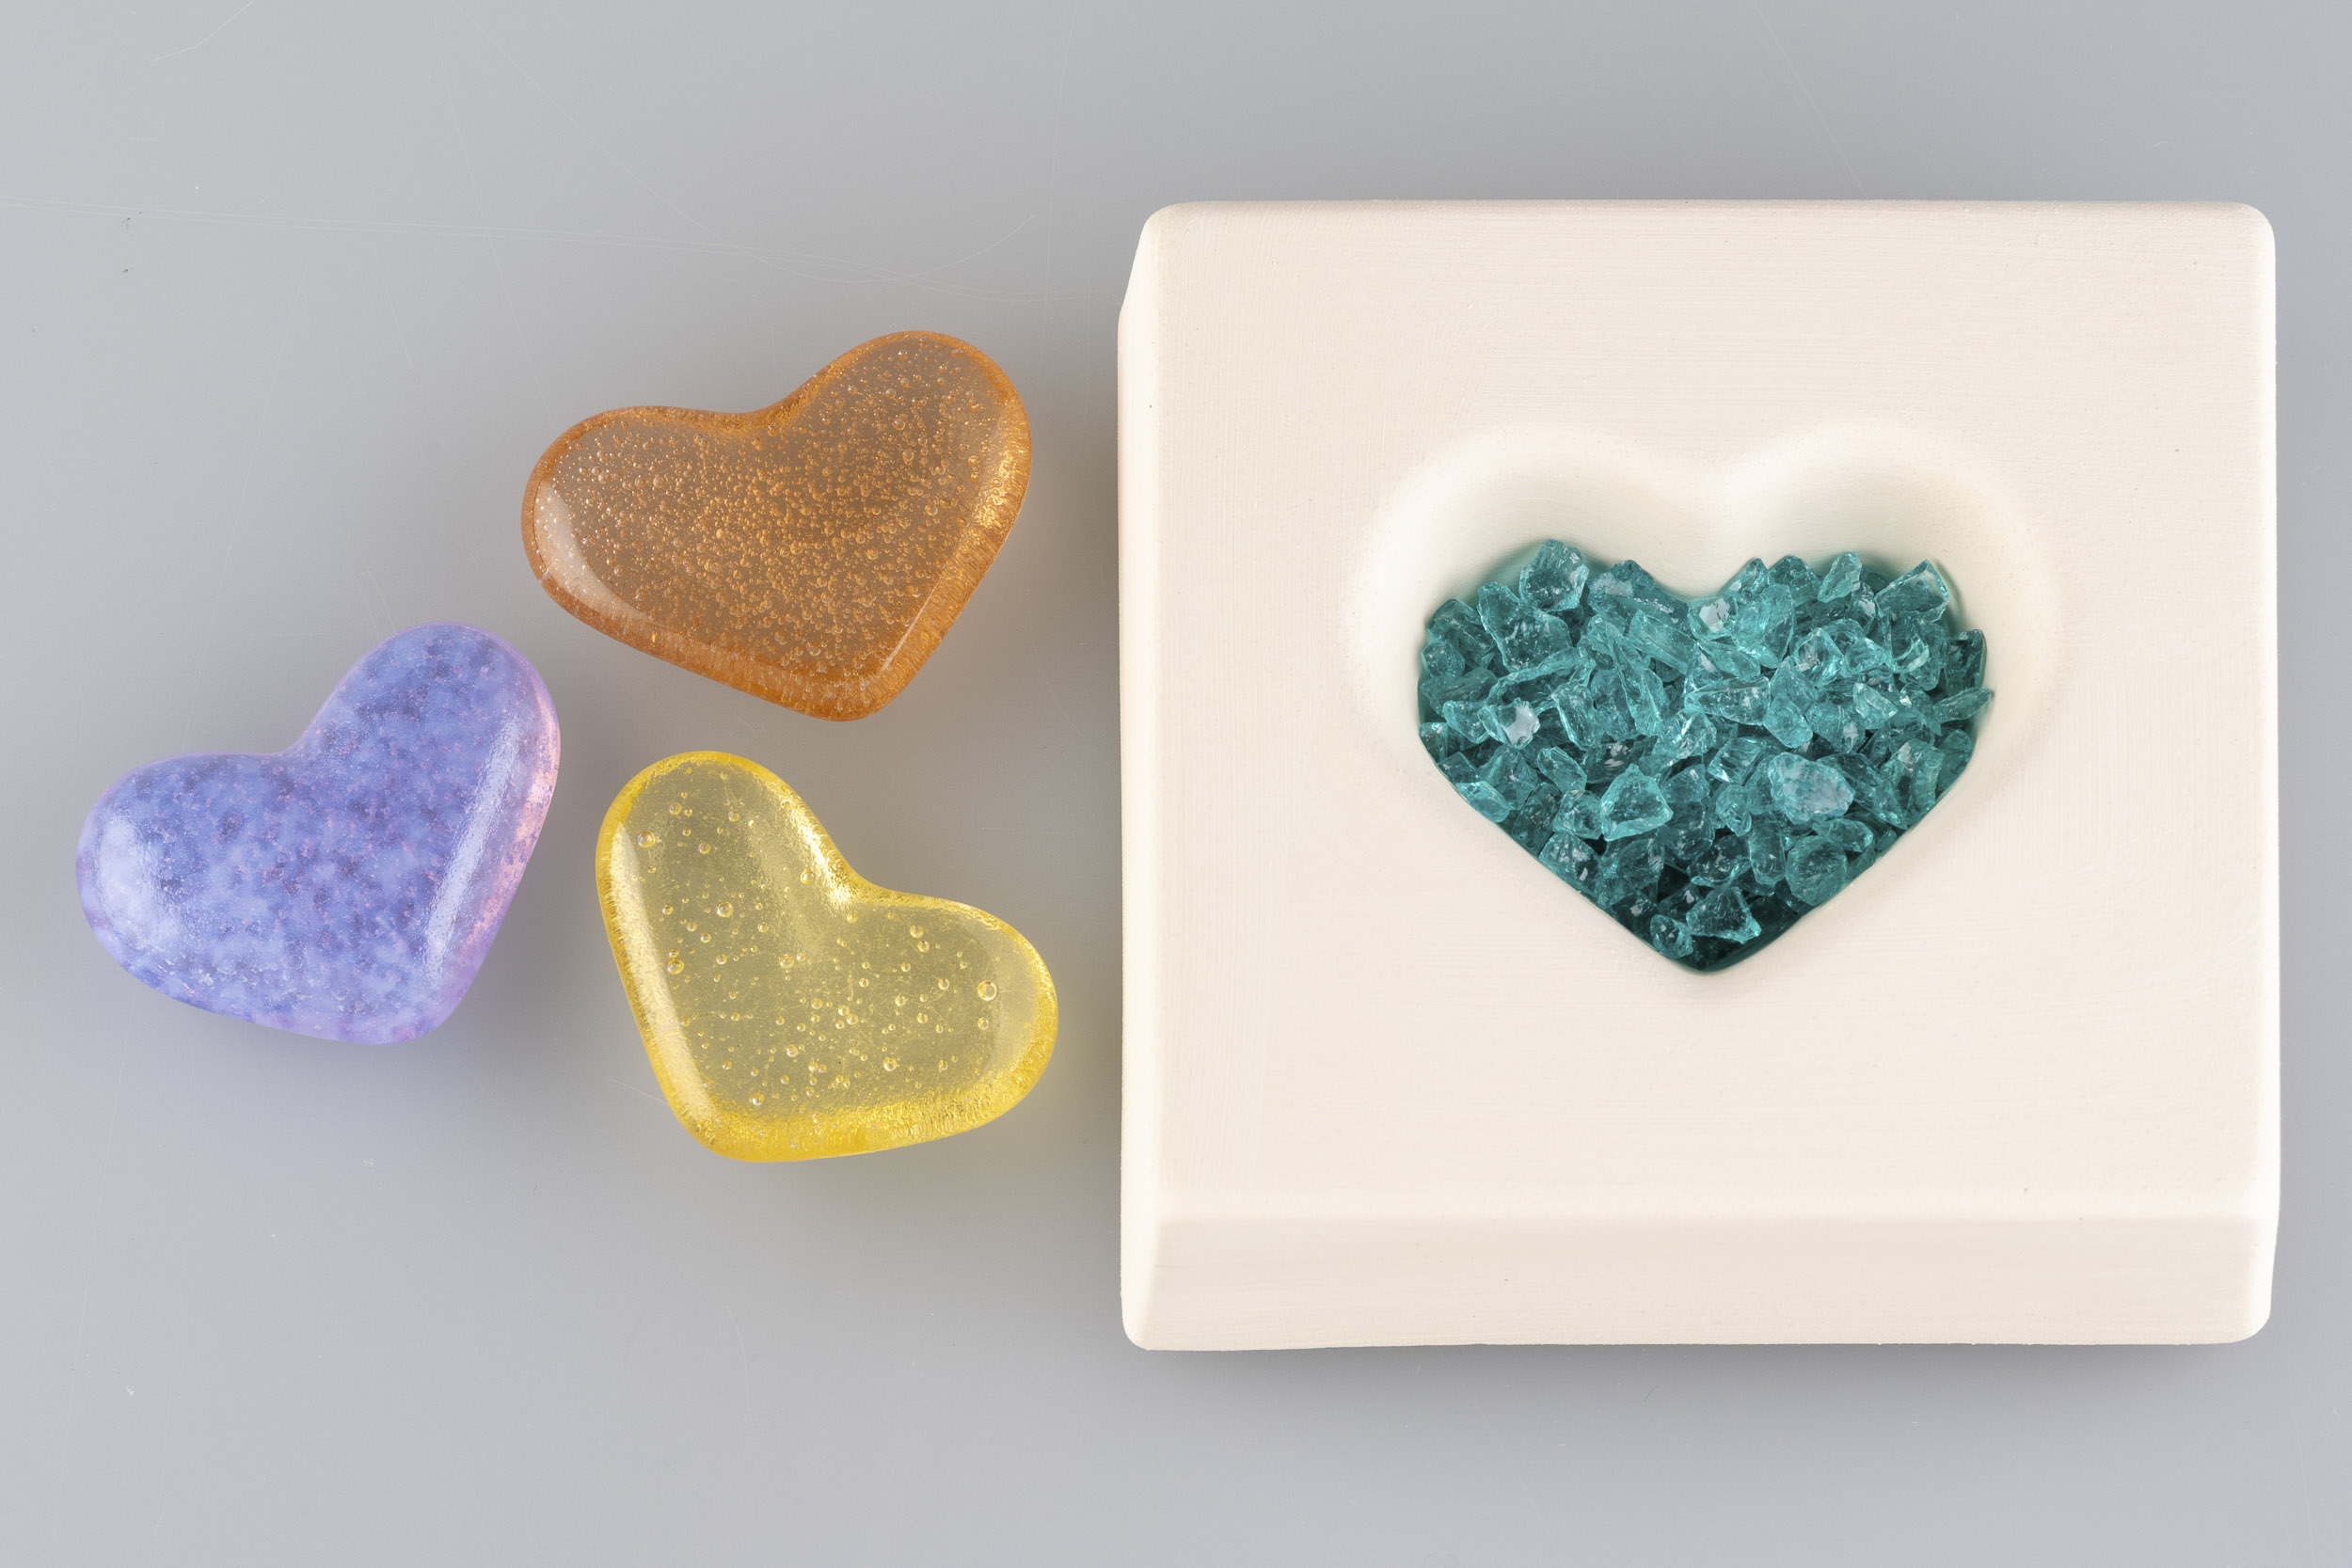 Heart Casting Mold, 3.9 x 3.5 in (10 x 9 cm)